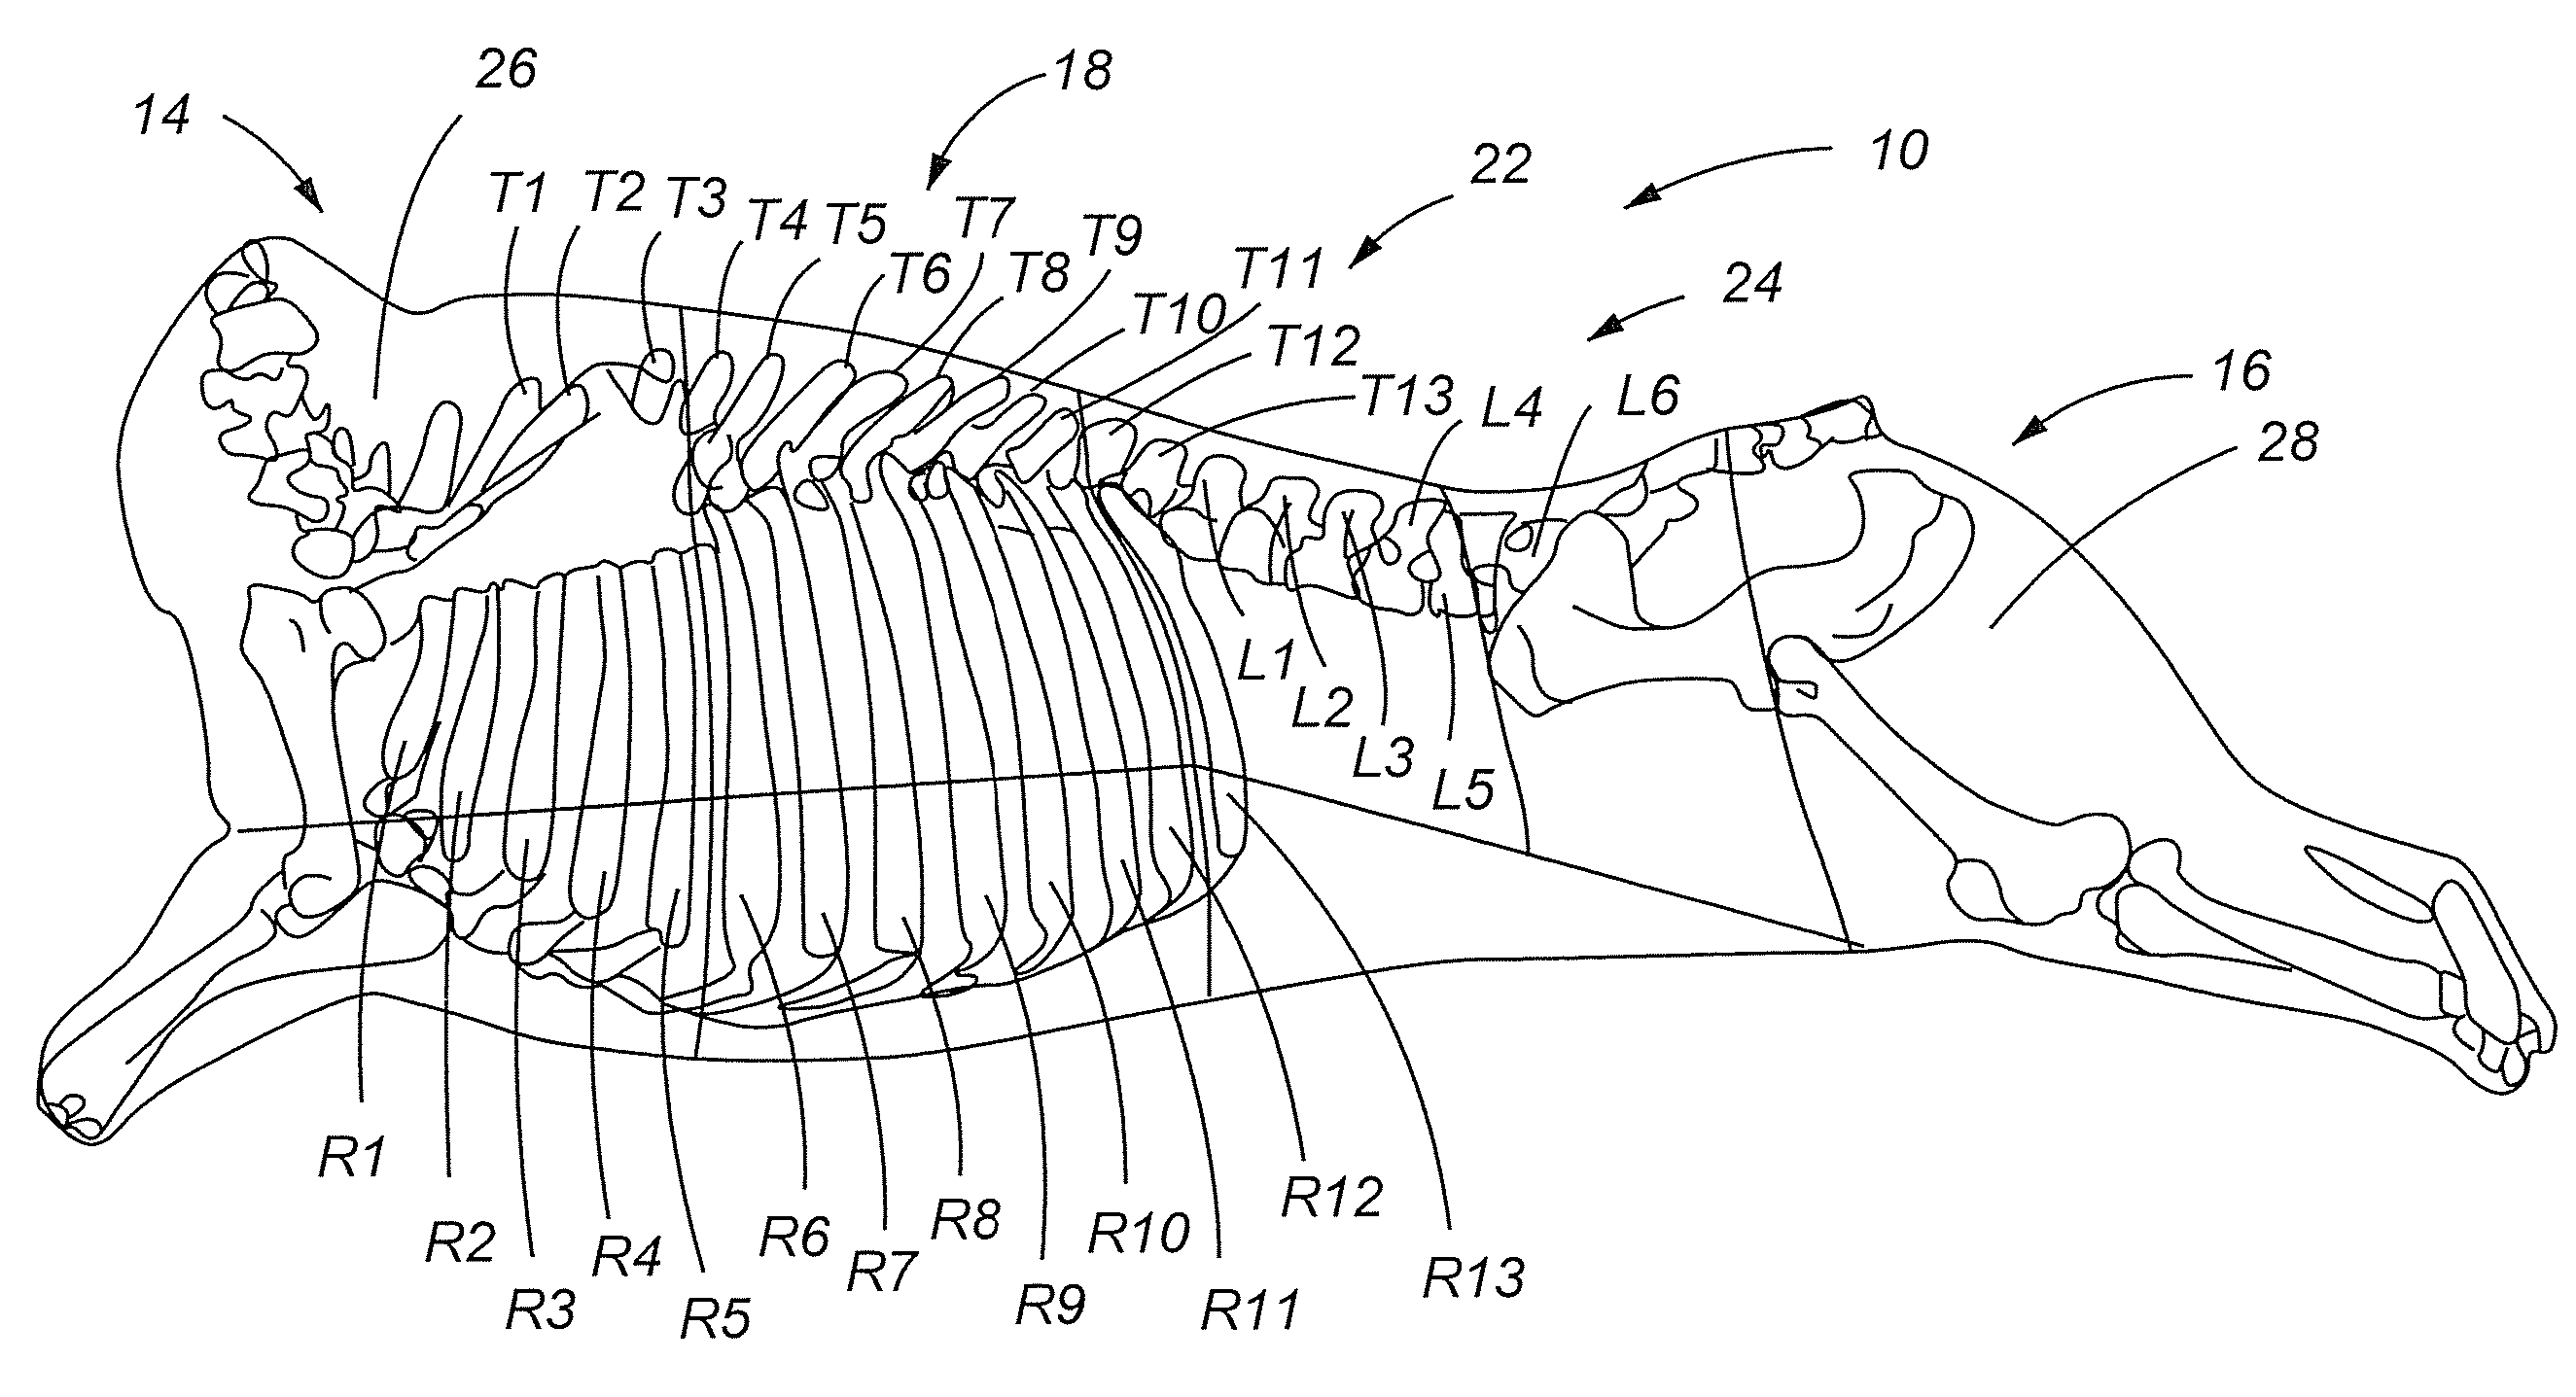 Multibar apparatus and method for electrically stimulating a carcass